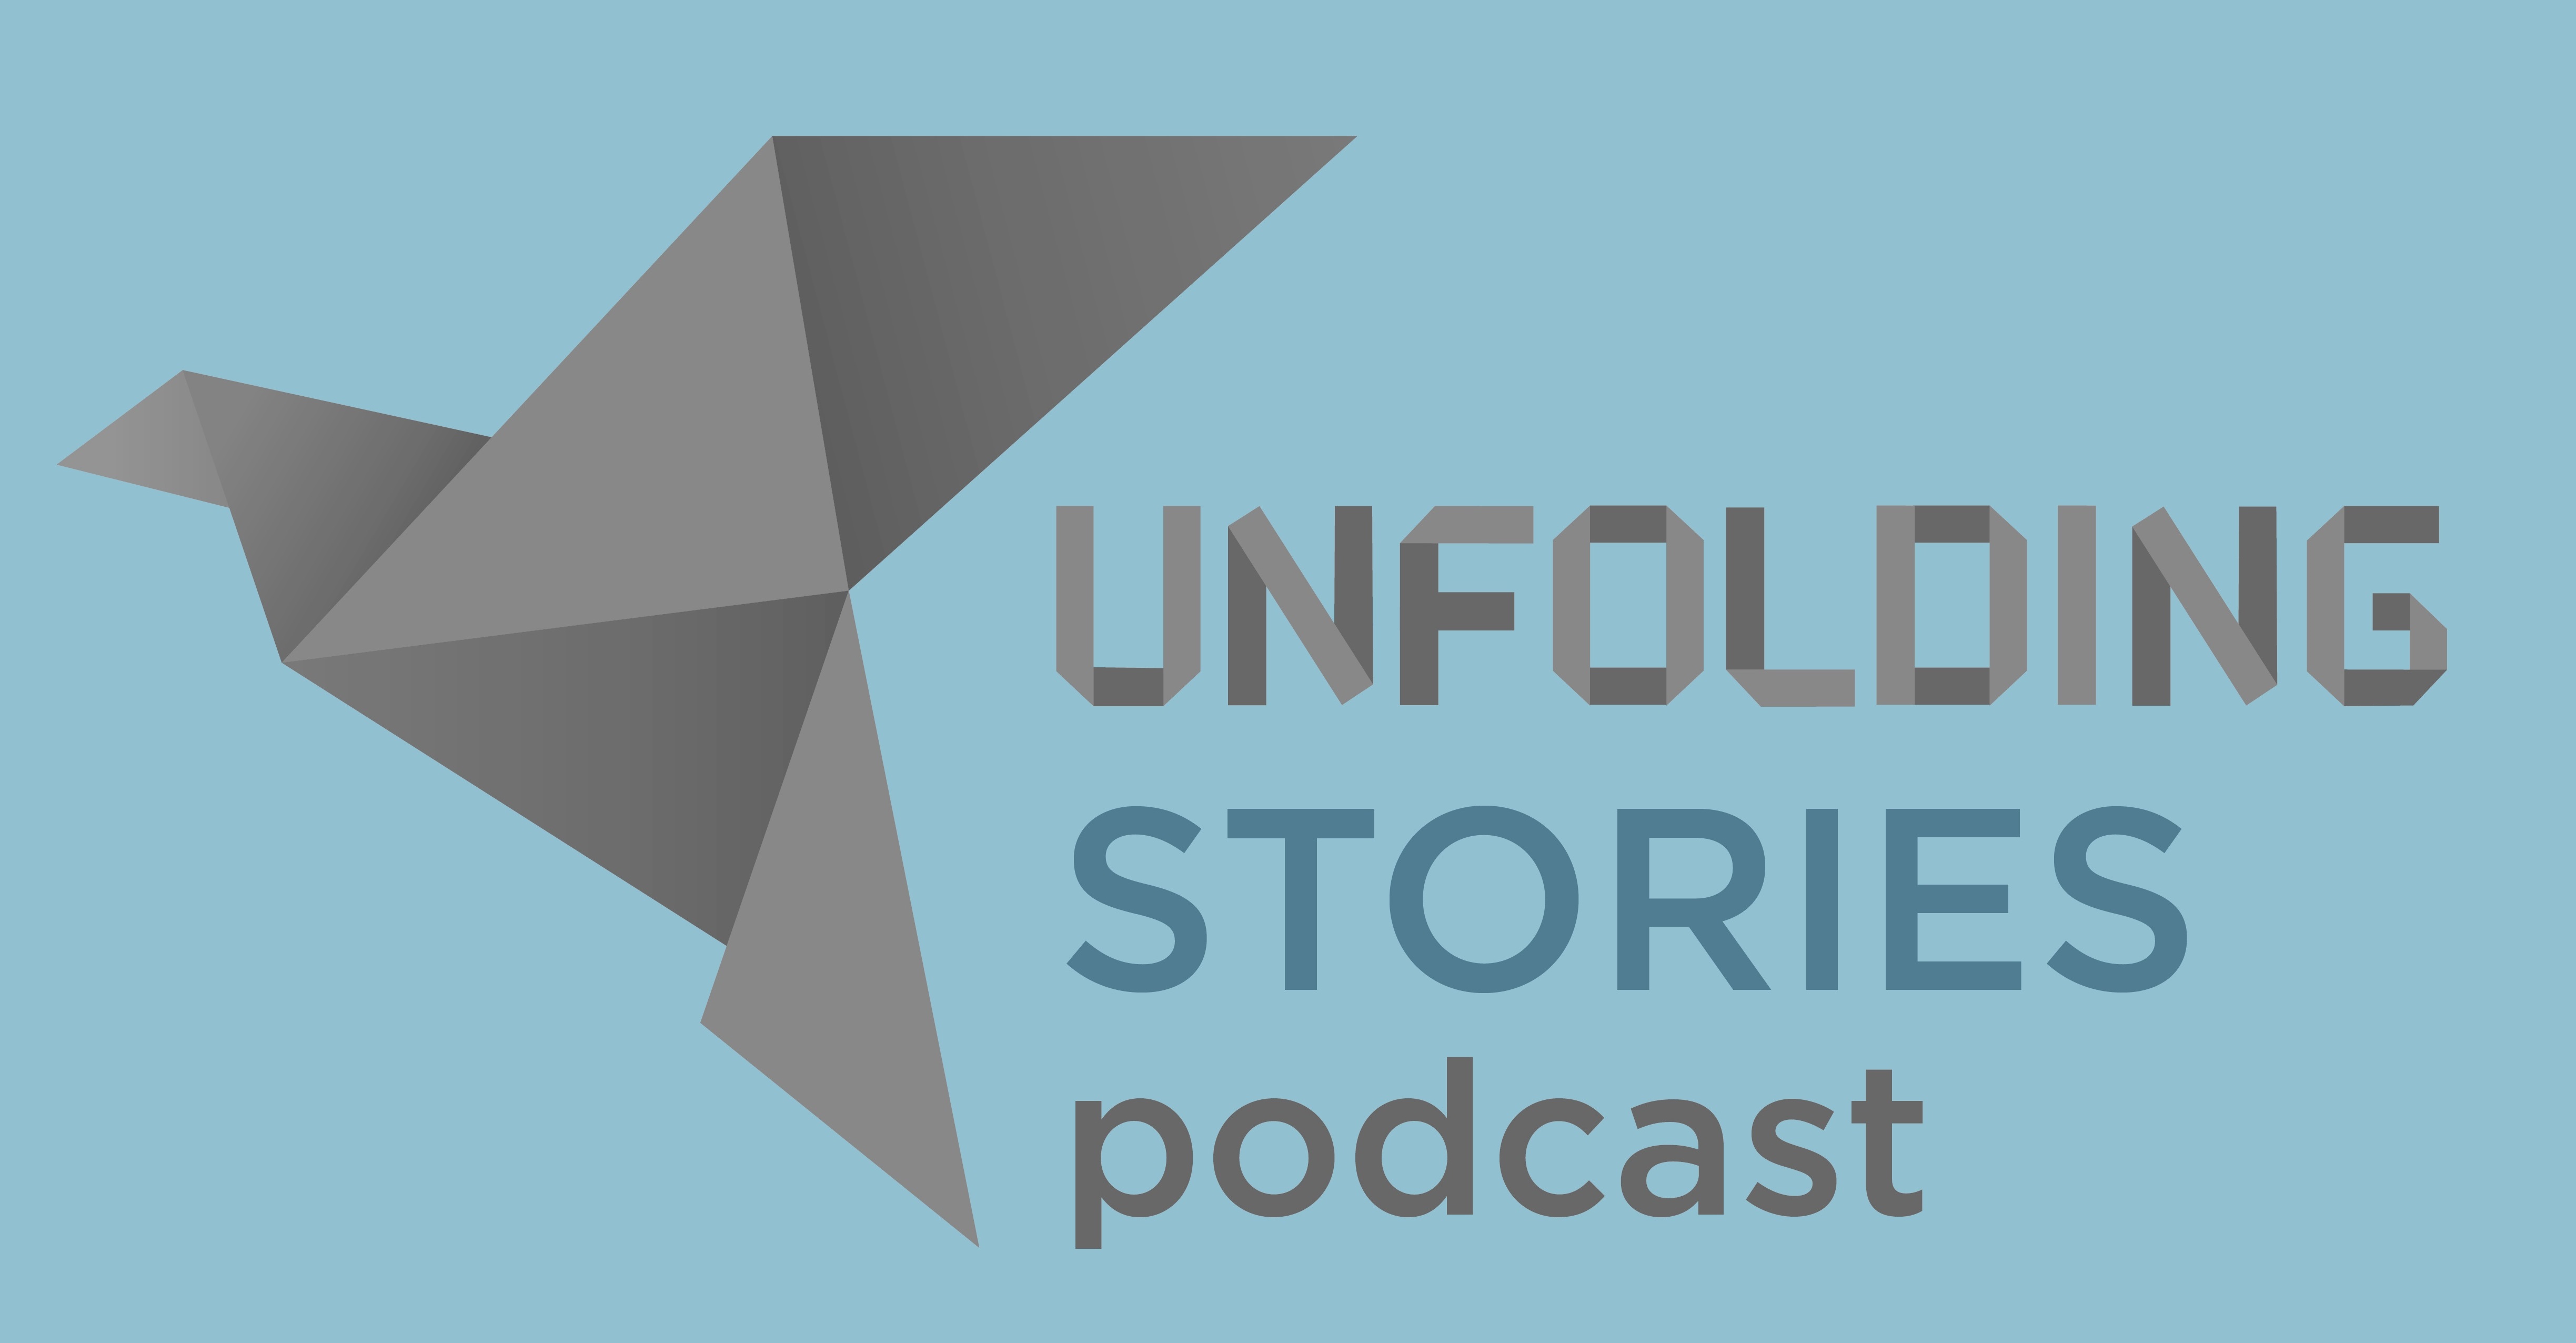 Welcome to Unfolding Stories Podcast-a Christian Podcast Dedicated to Testimony